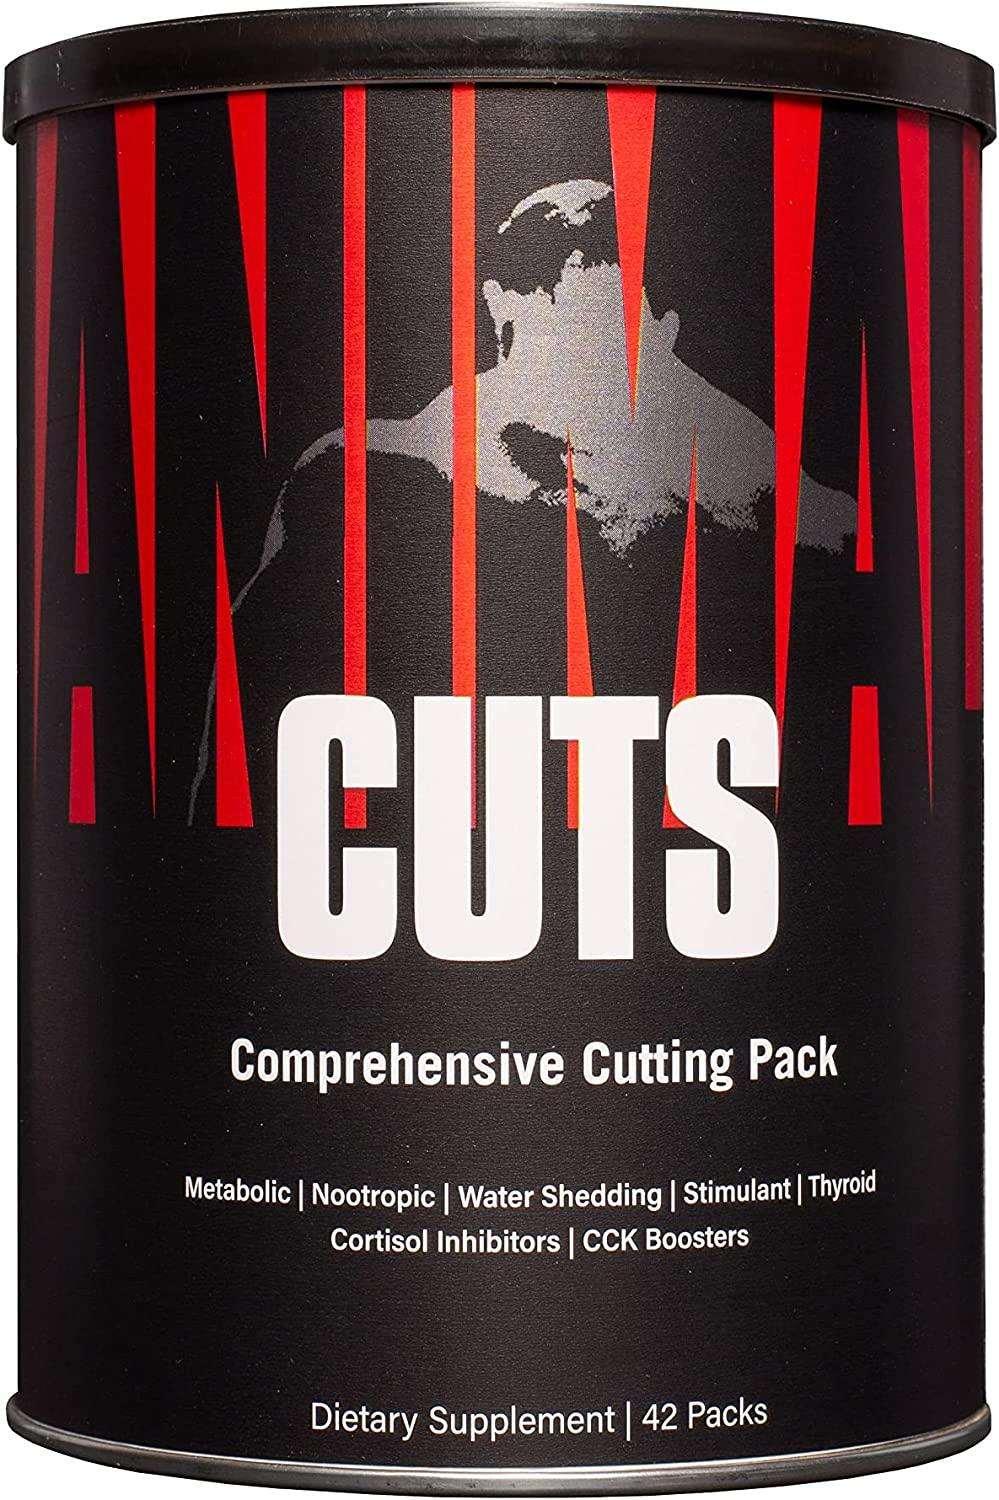 Universal Nutrition - Animal Cuts Complete Cutting Stacks - 42 Pack(s) - NutriVita